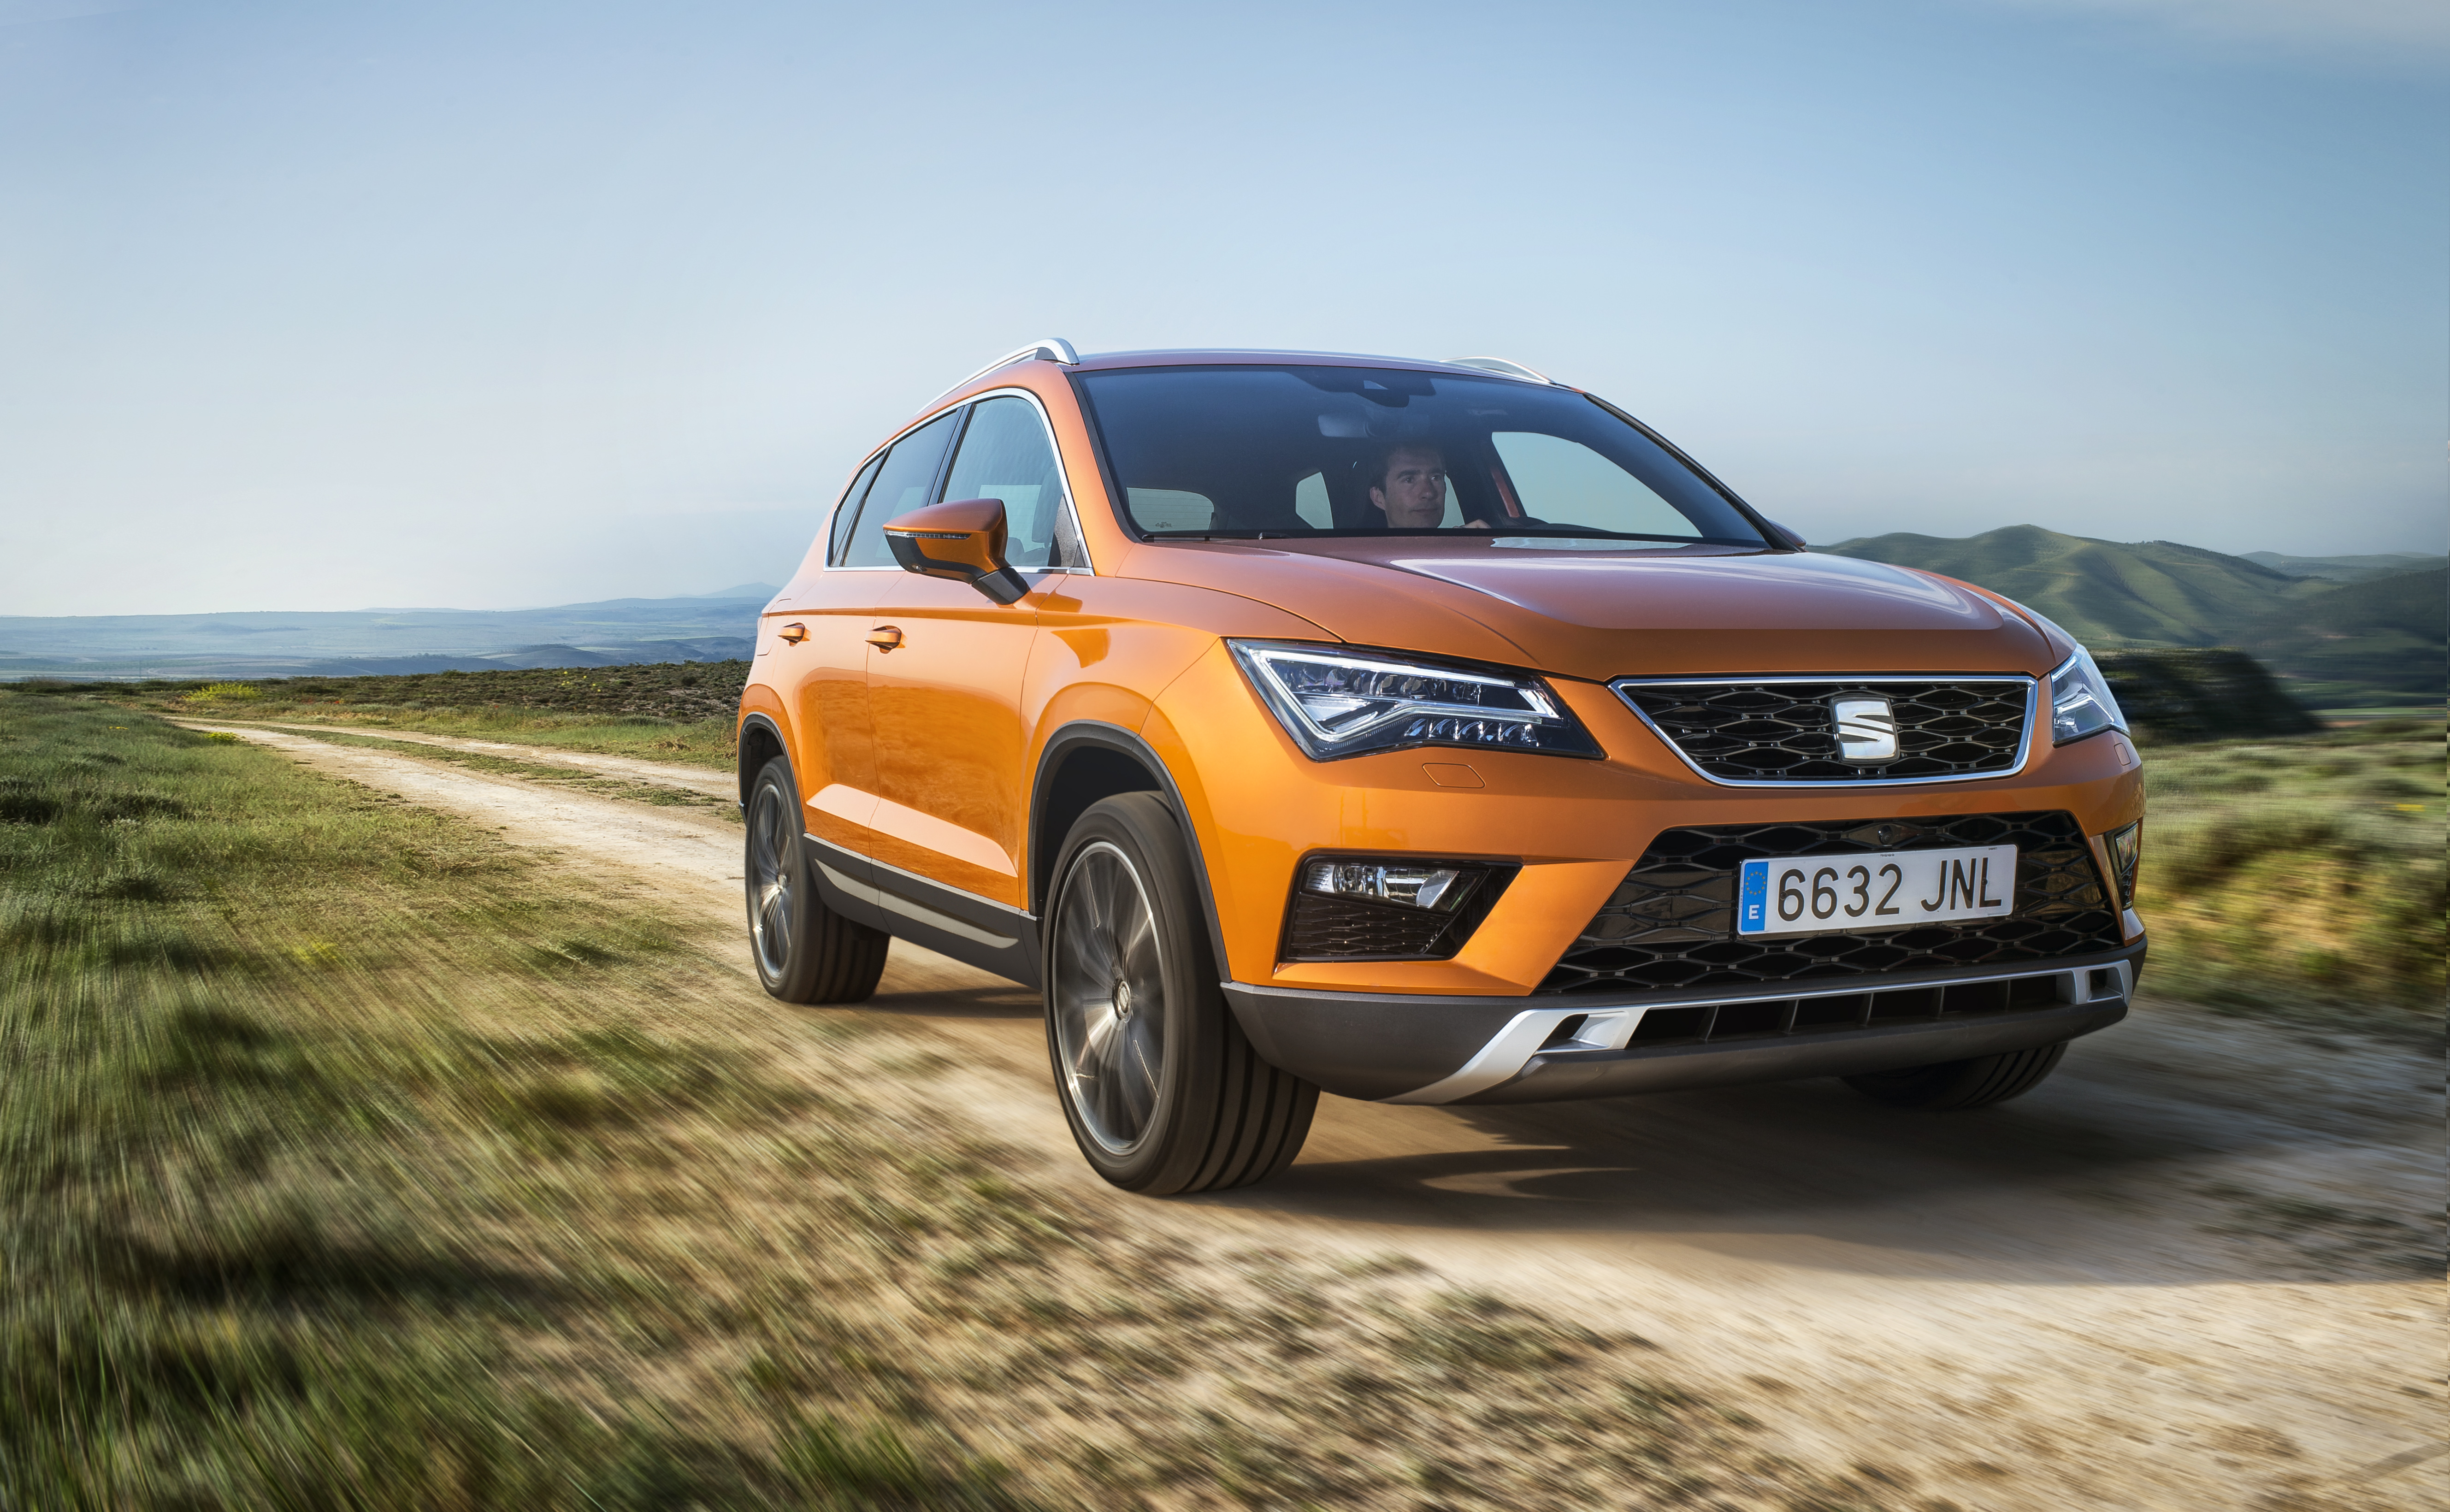 New Seat Ateca SUV front view